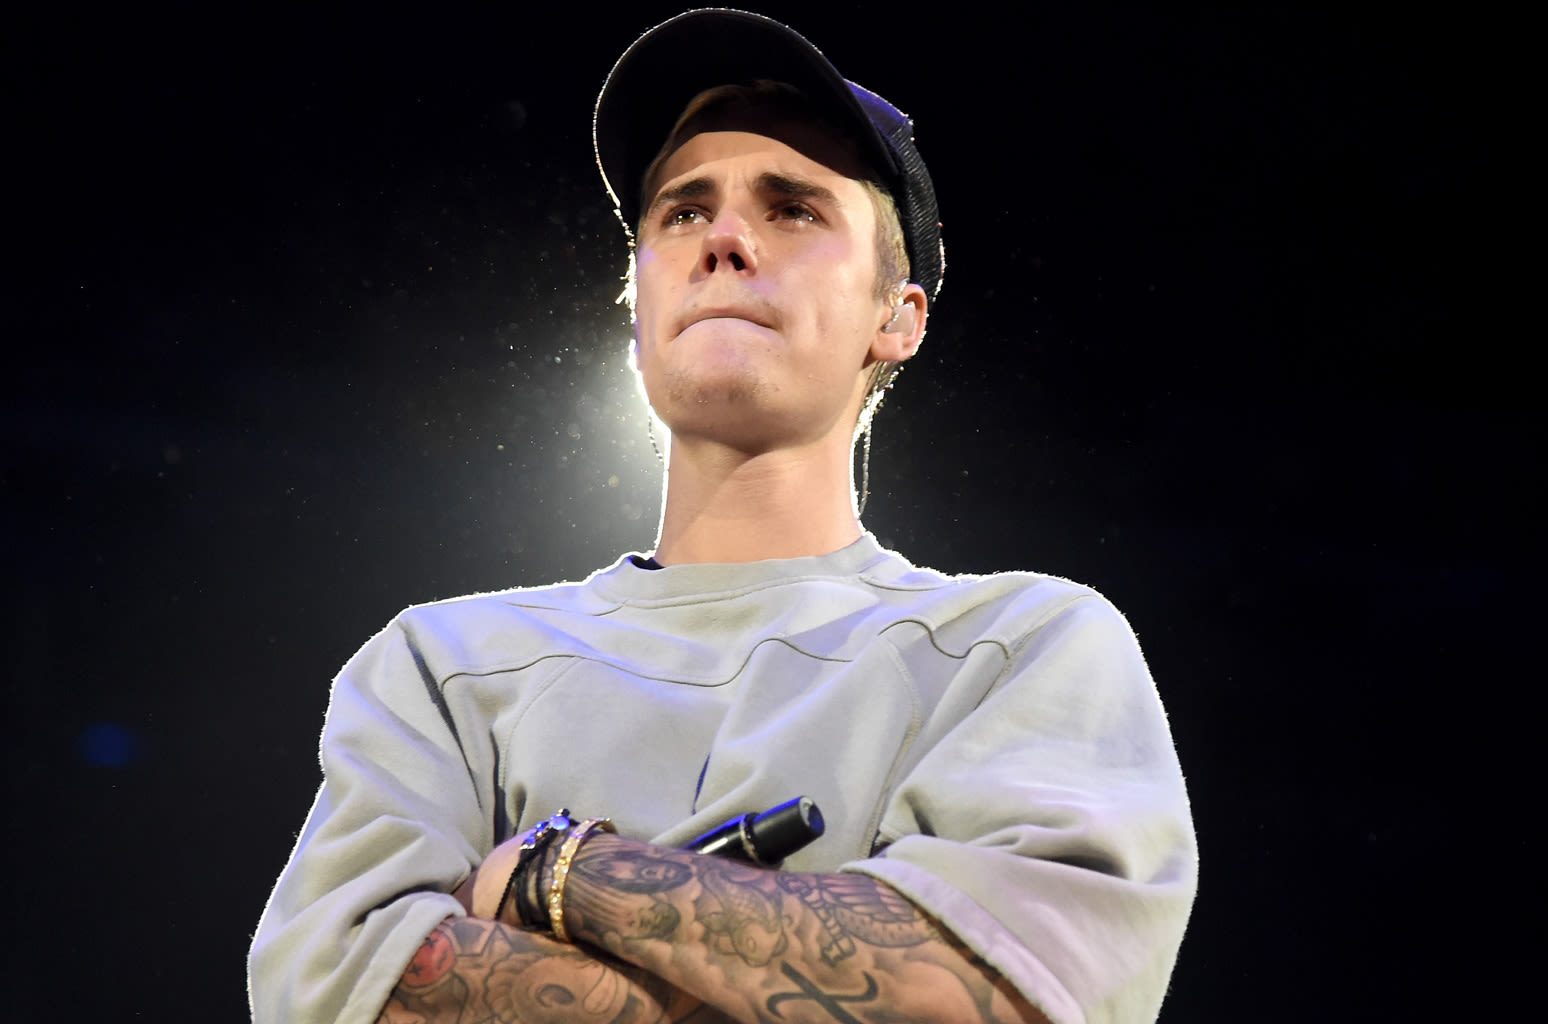 Hailey Bieber Says Husband Justin Bieber Is a ‘Pretty Crier’ After Singer Posts Tear-Stained Pics